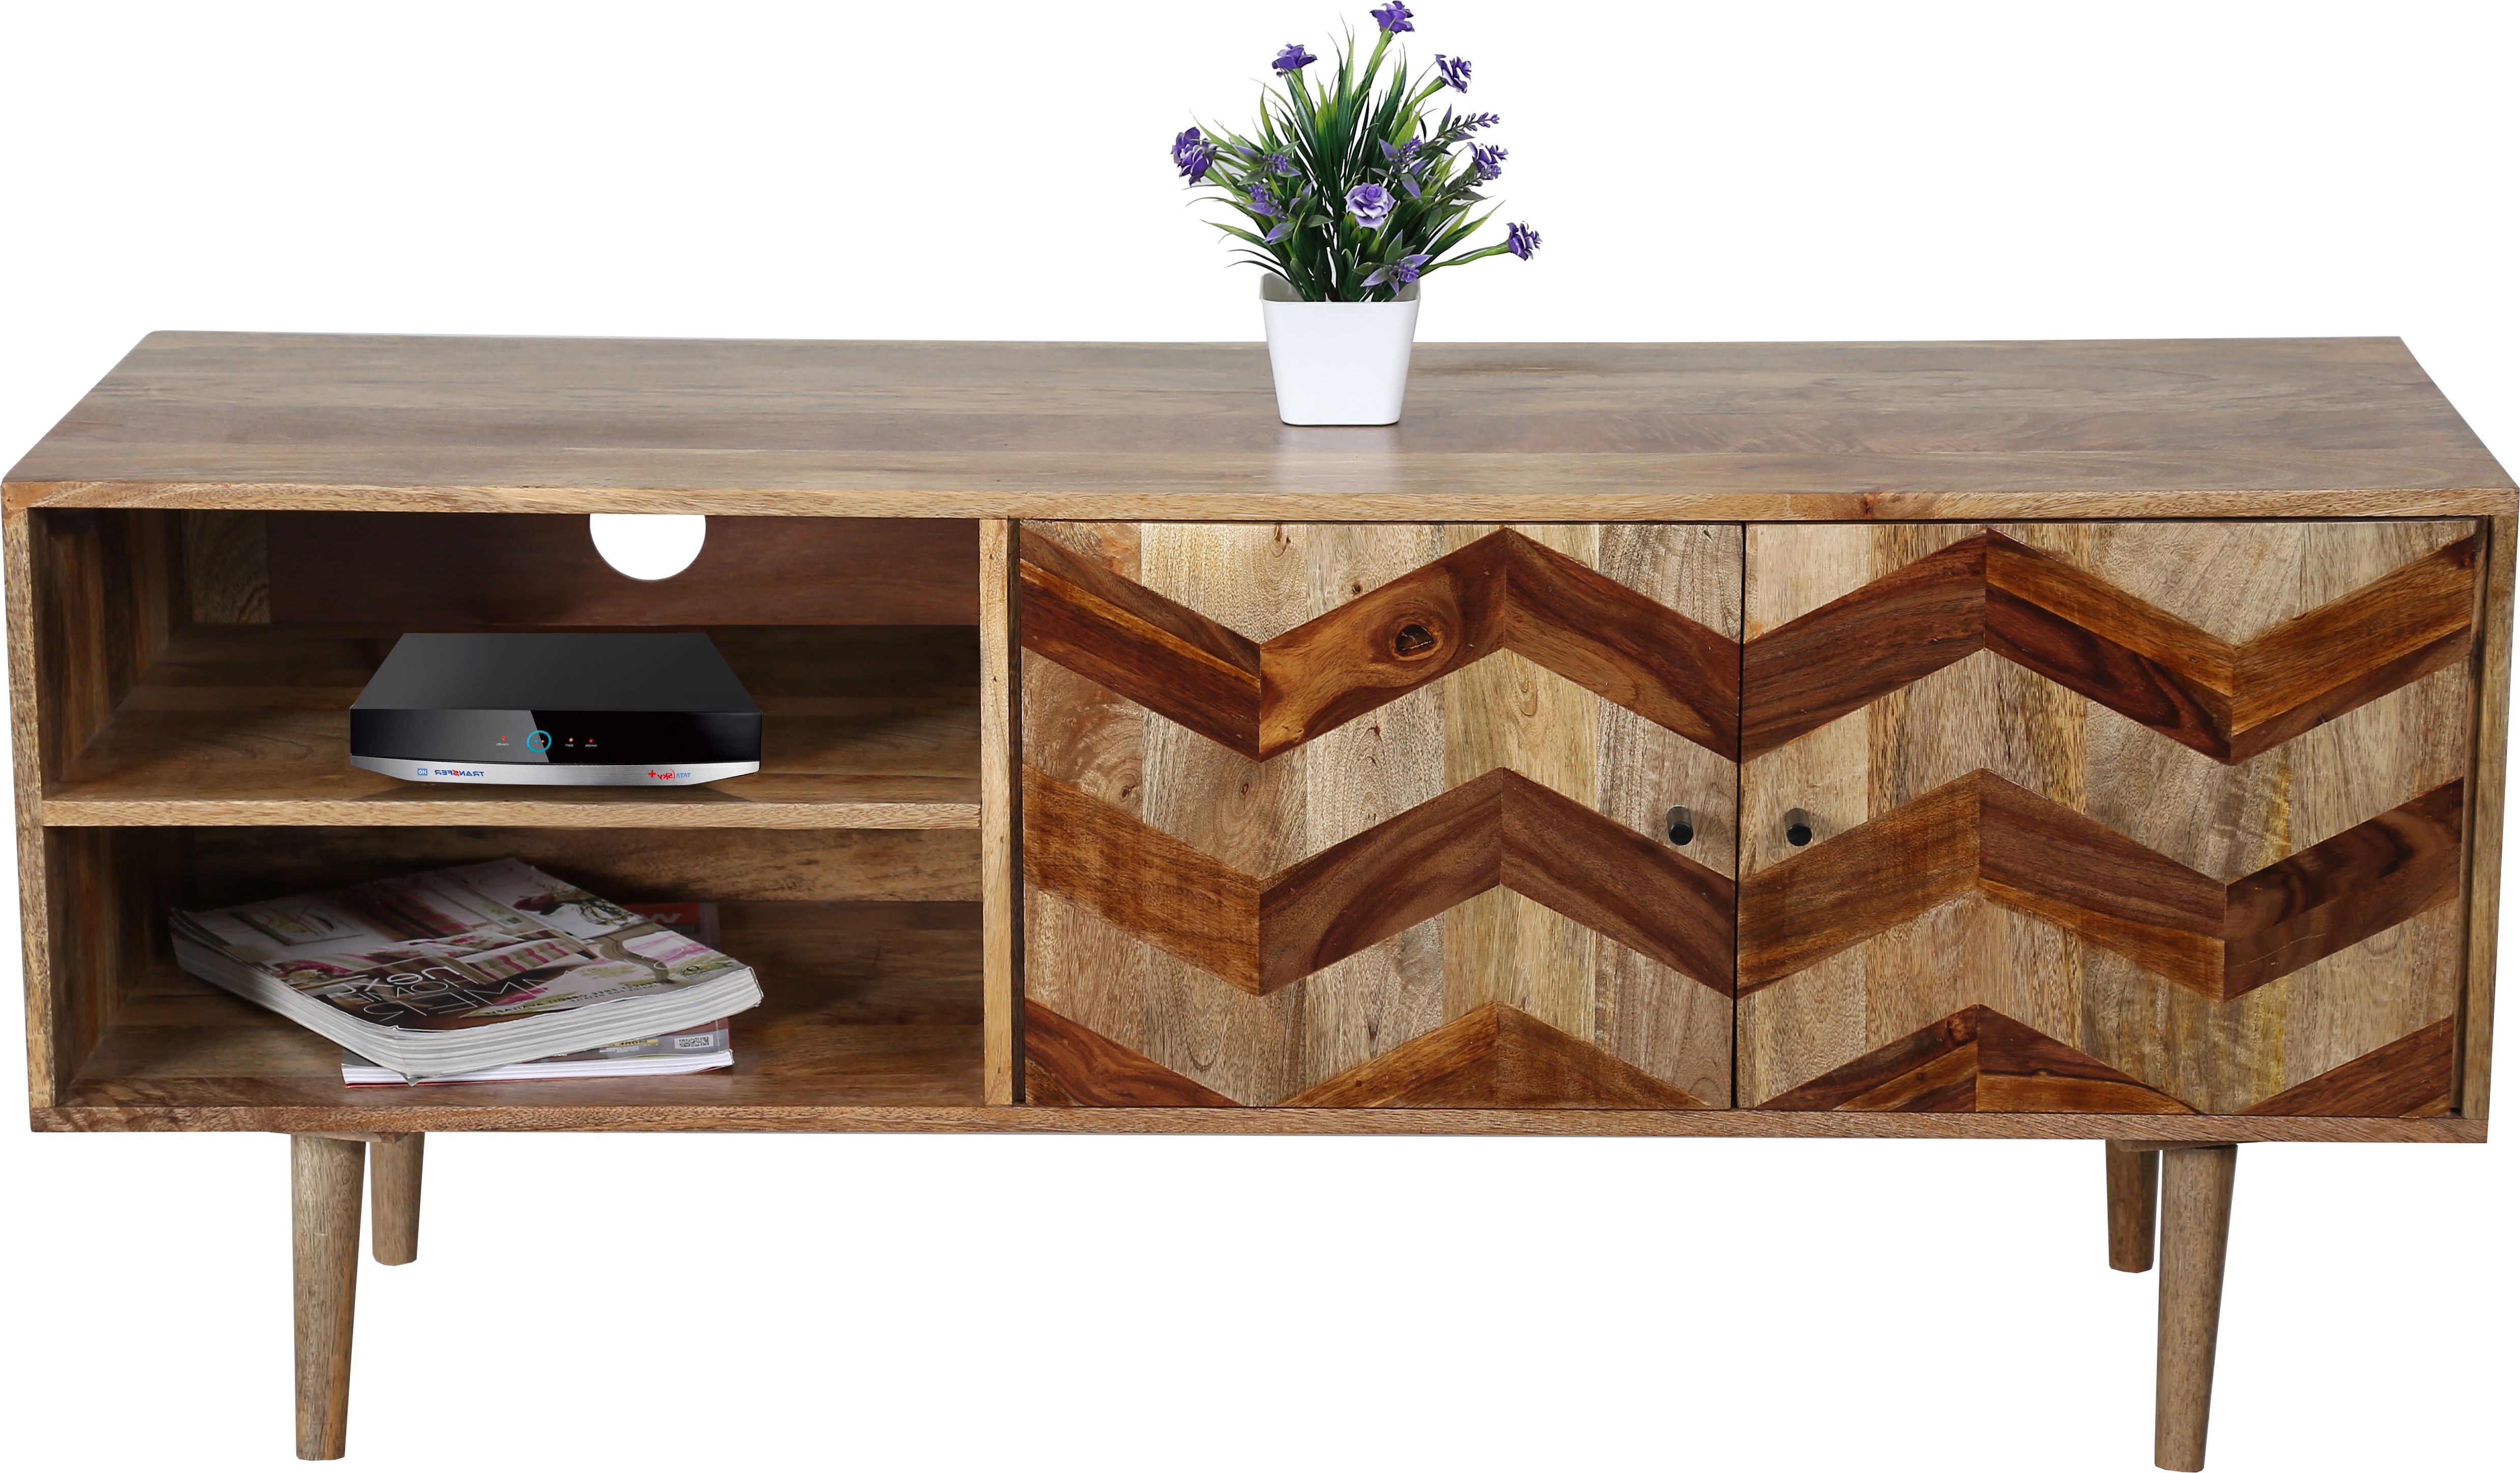 Mango Wood Tv Cabinets Throughout Well Known Zigzag Themed Tv Cabinet In Light Mango Wood With Wooden Legs (View 1 of 20)